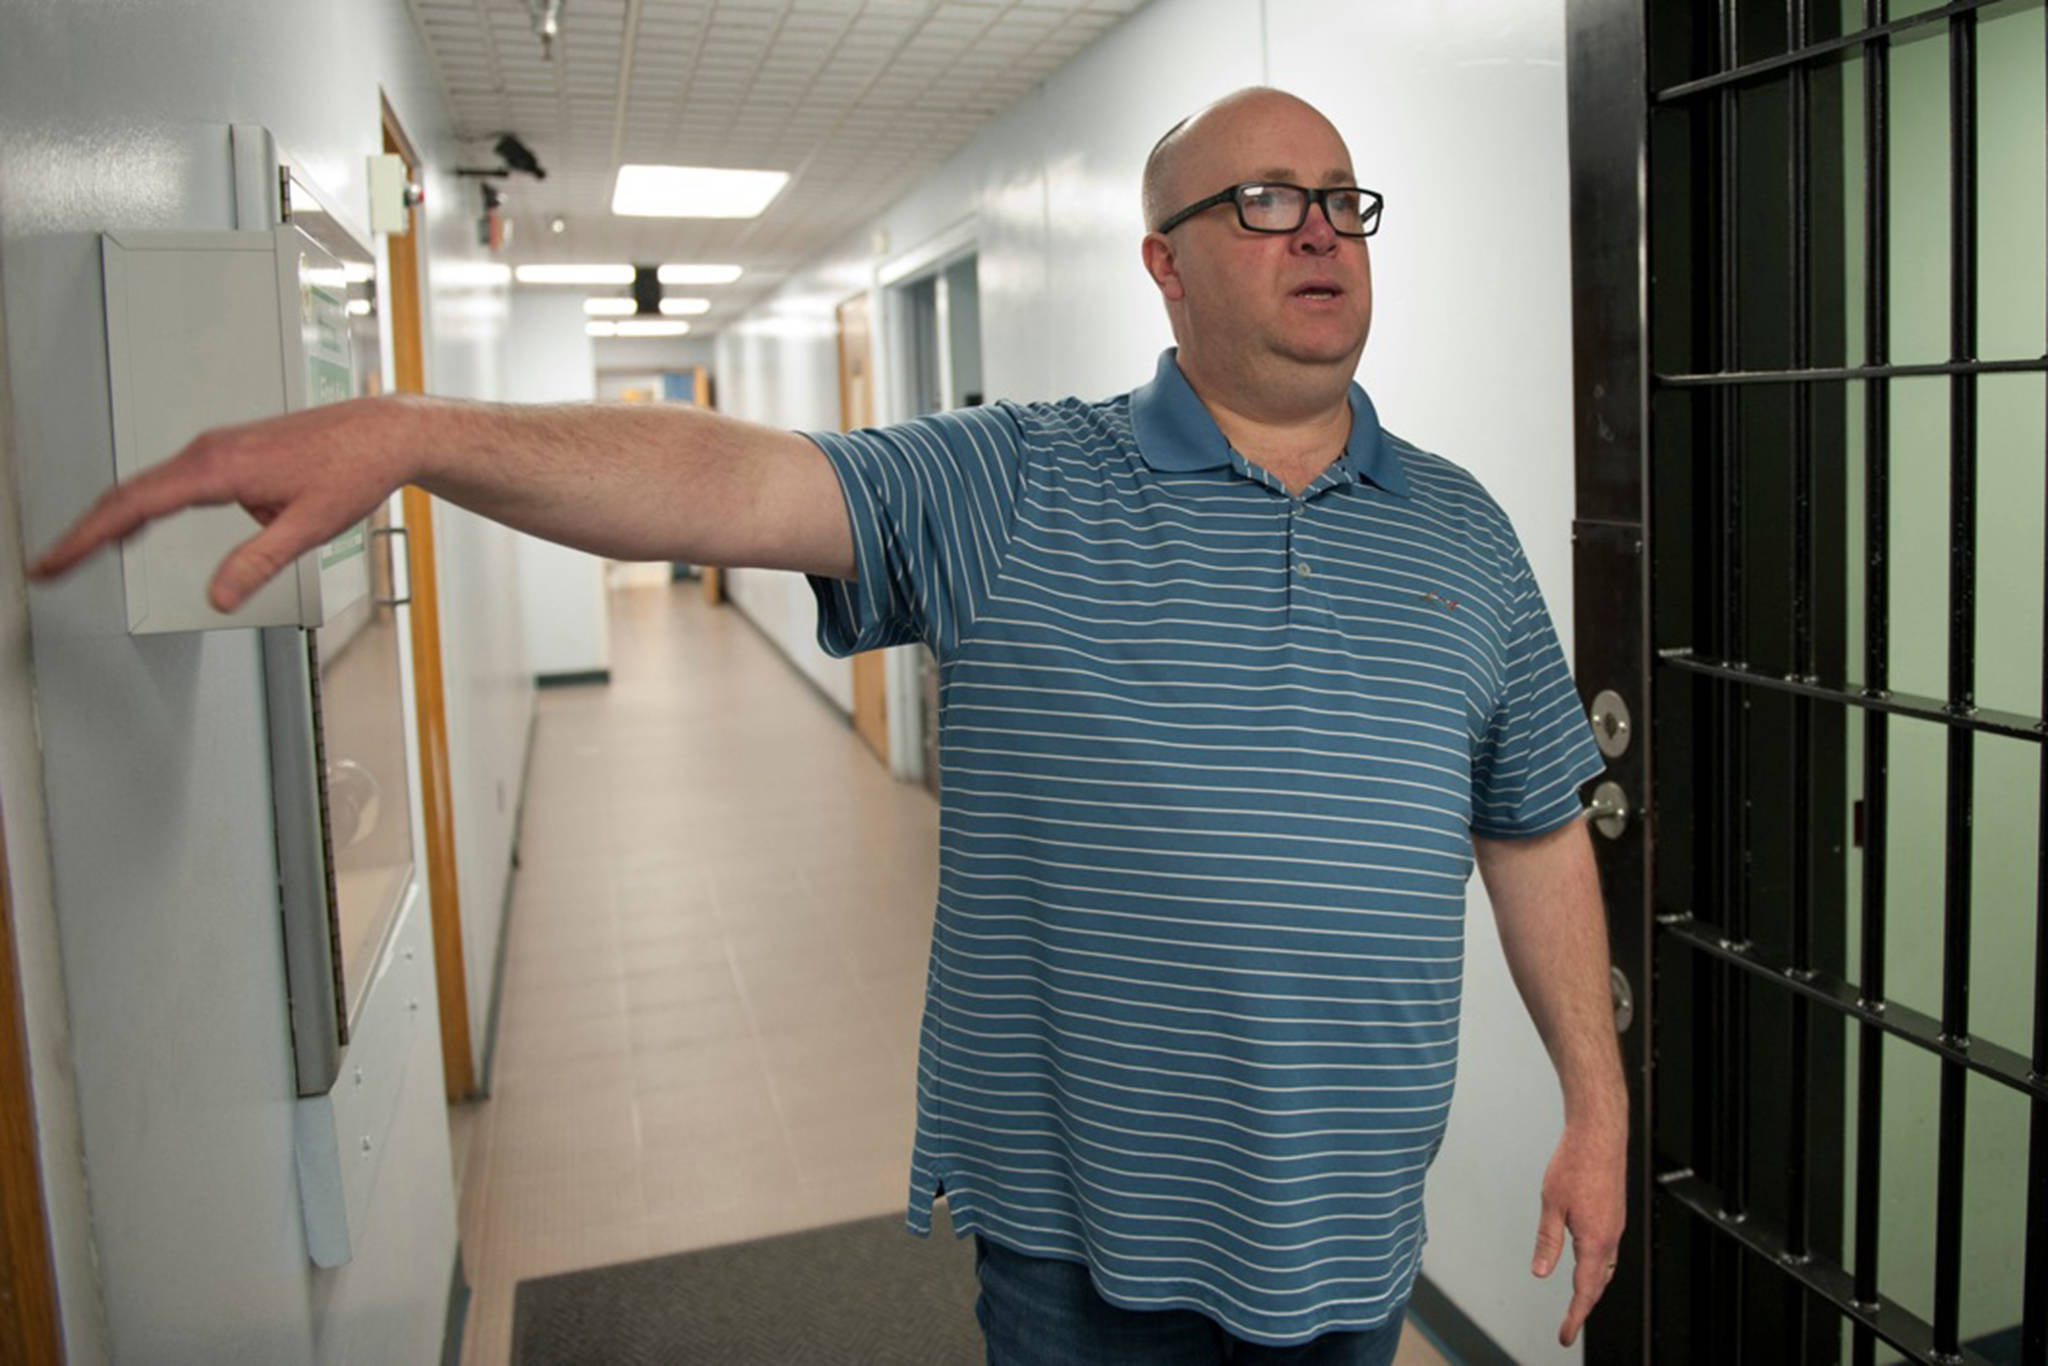 Sitka Police Chief Jeff Ankerfelt gives a tour of the police station on May 17, 2018. (Courtesy Photo | James Poulson, Sitka Sentinel)